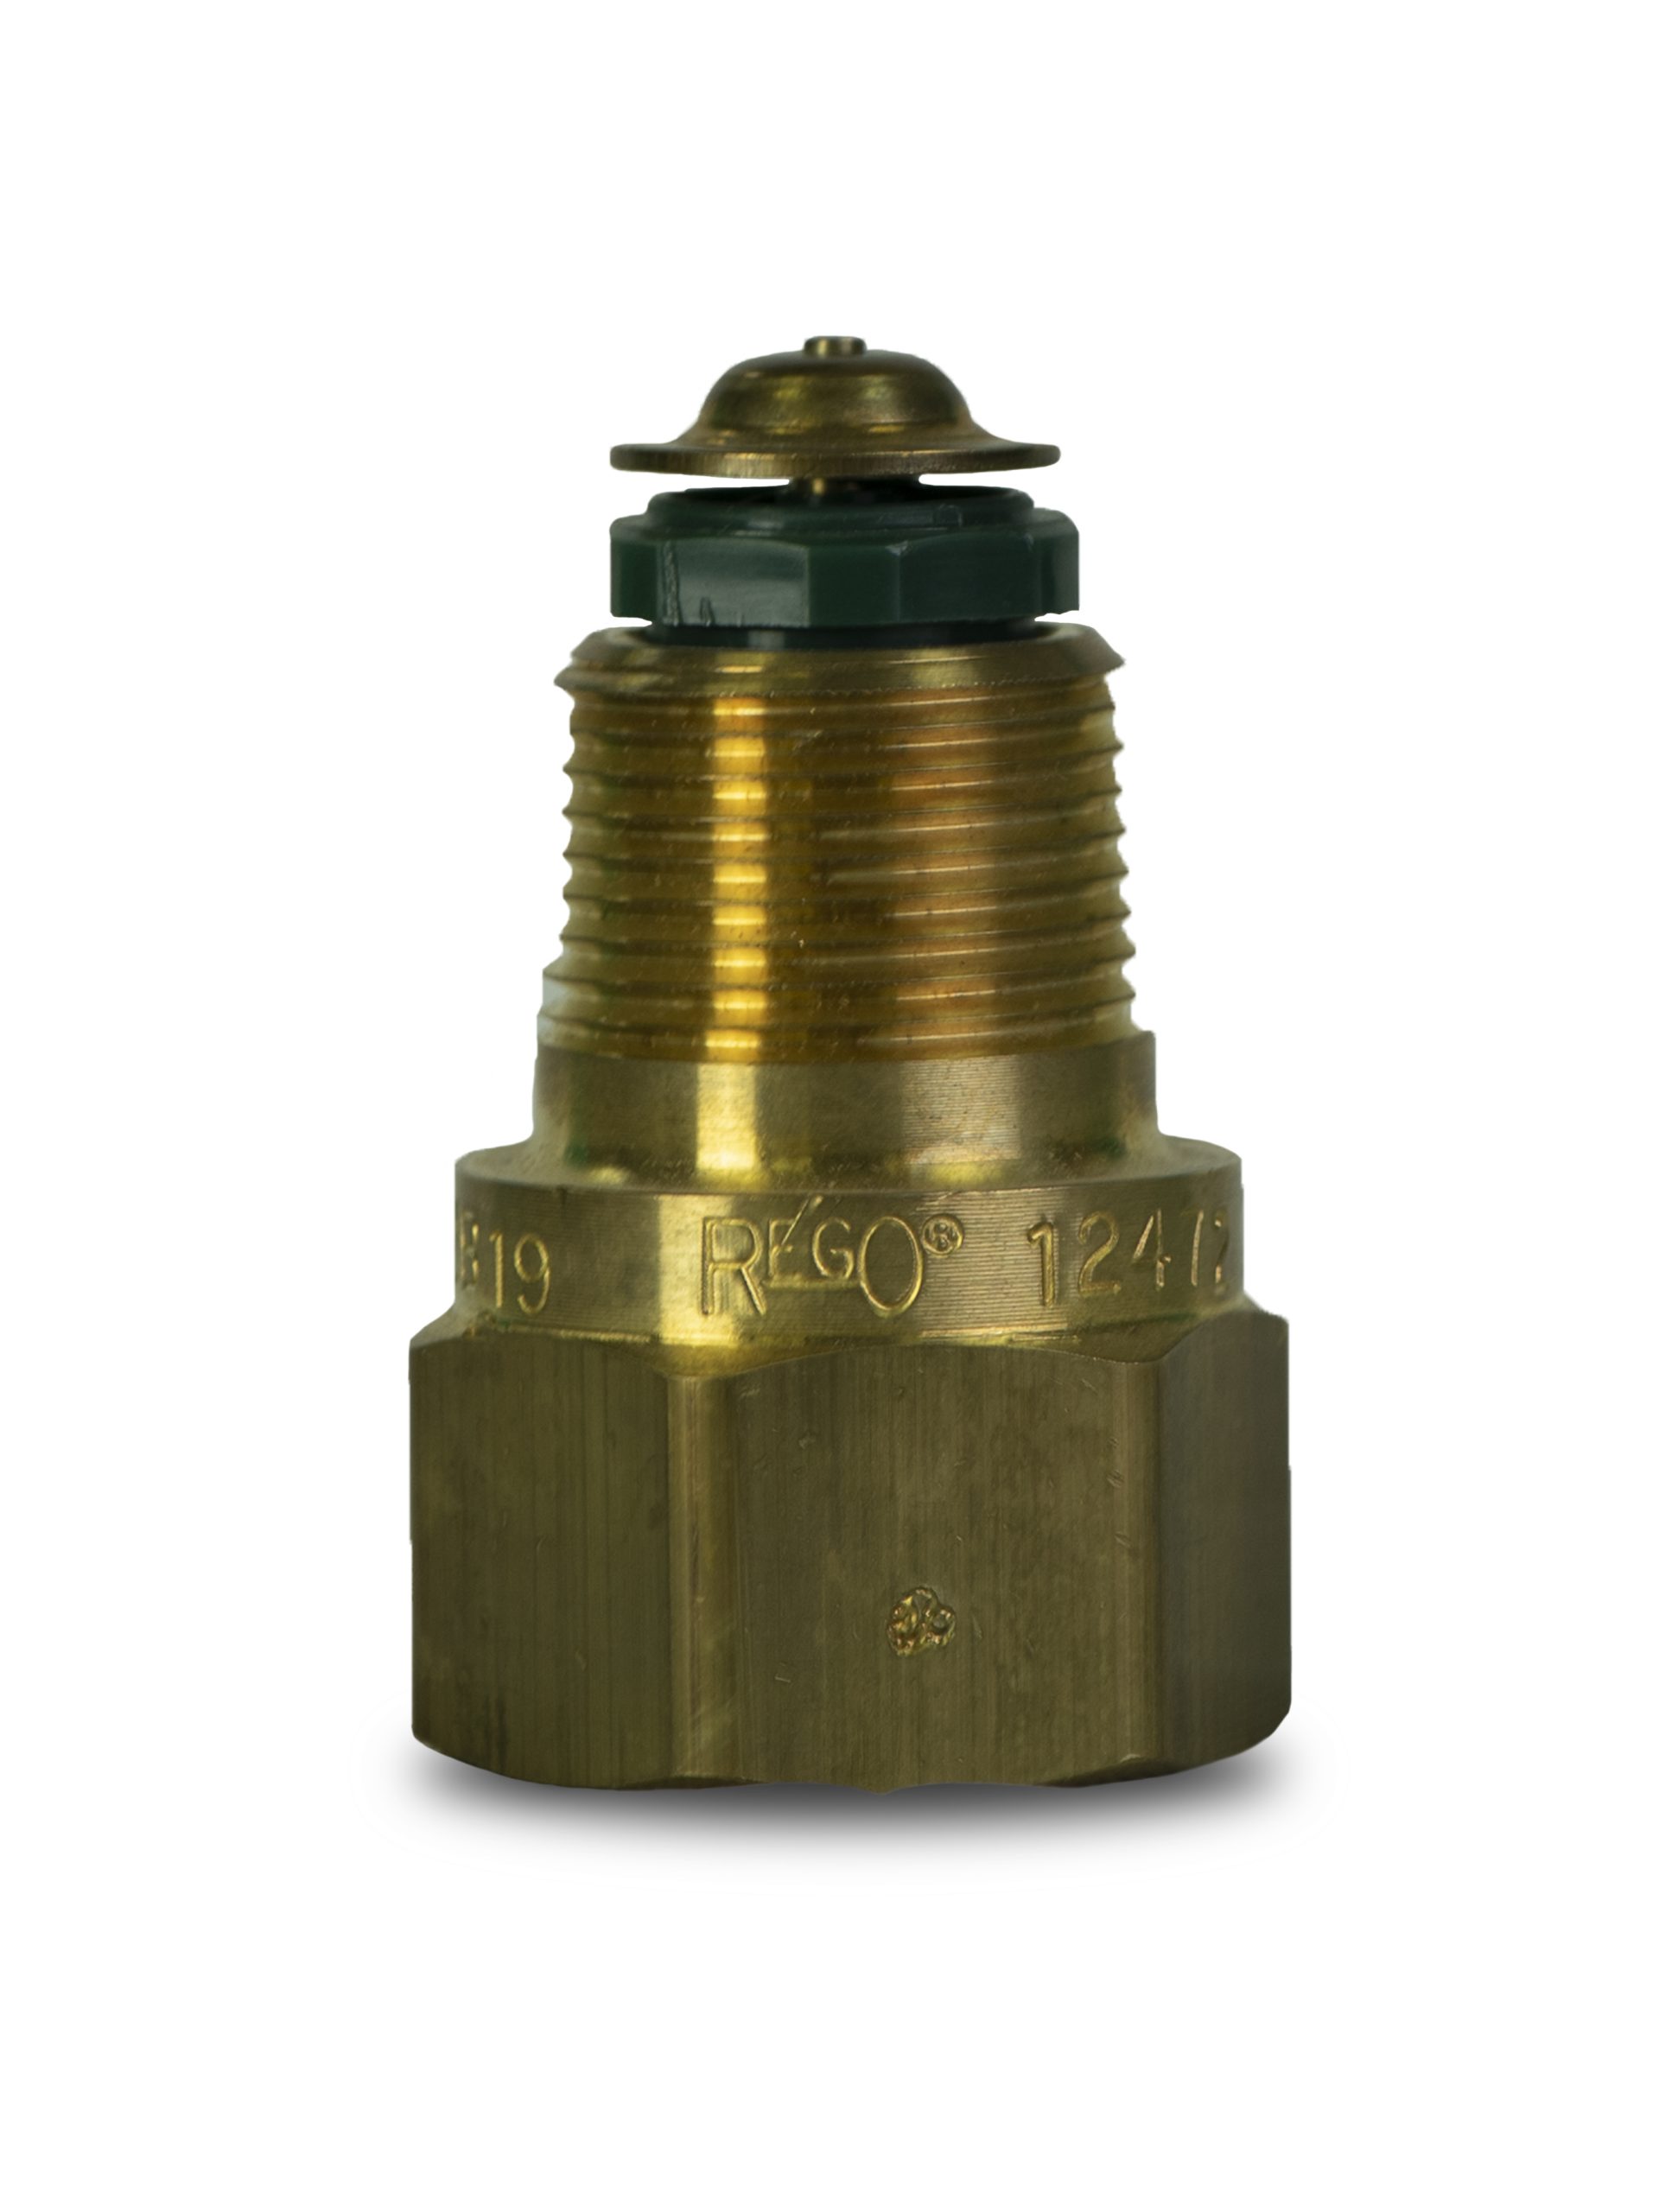 EXCESS FLOW VALVE 3/4 Inches BRASS 4GPM